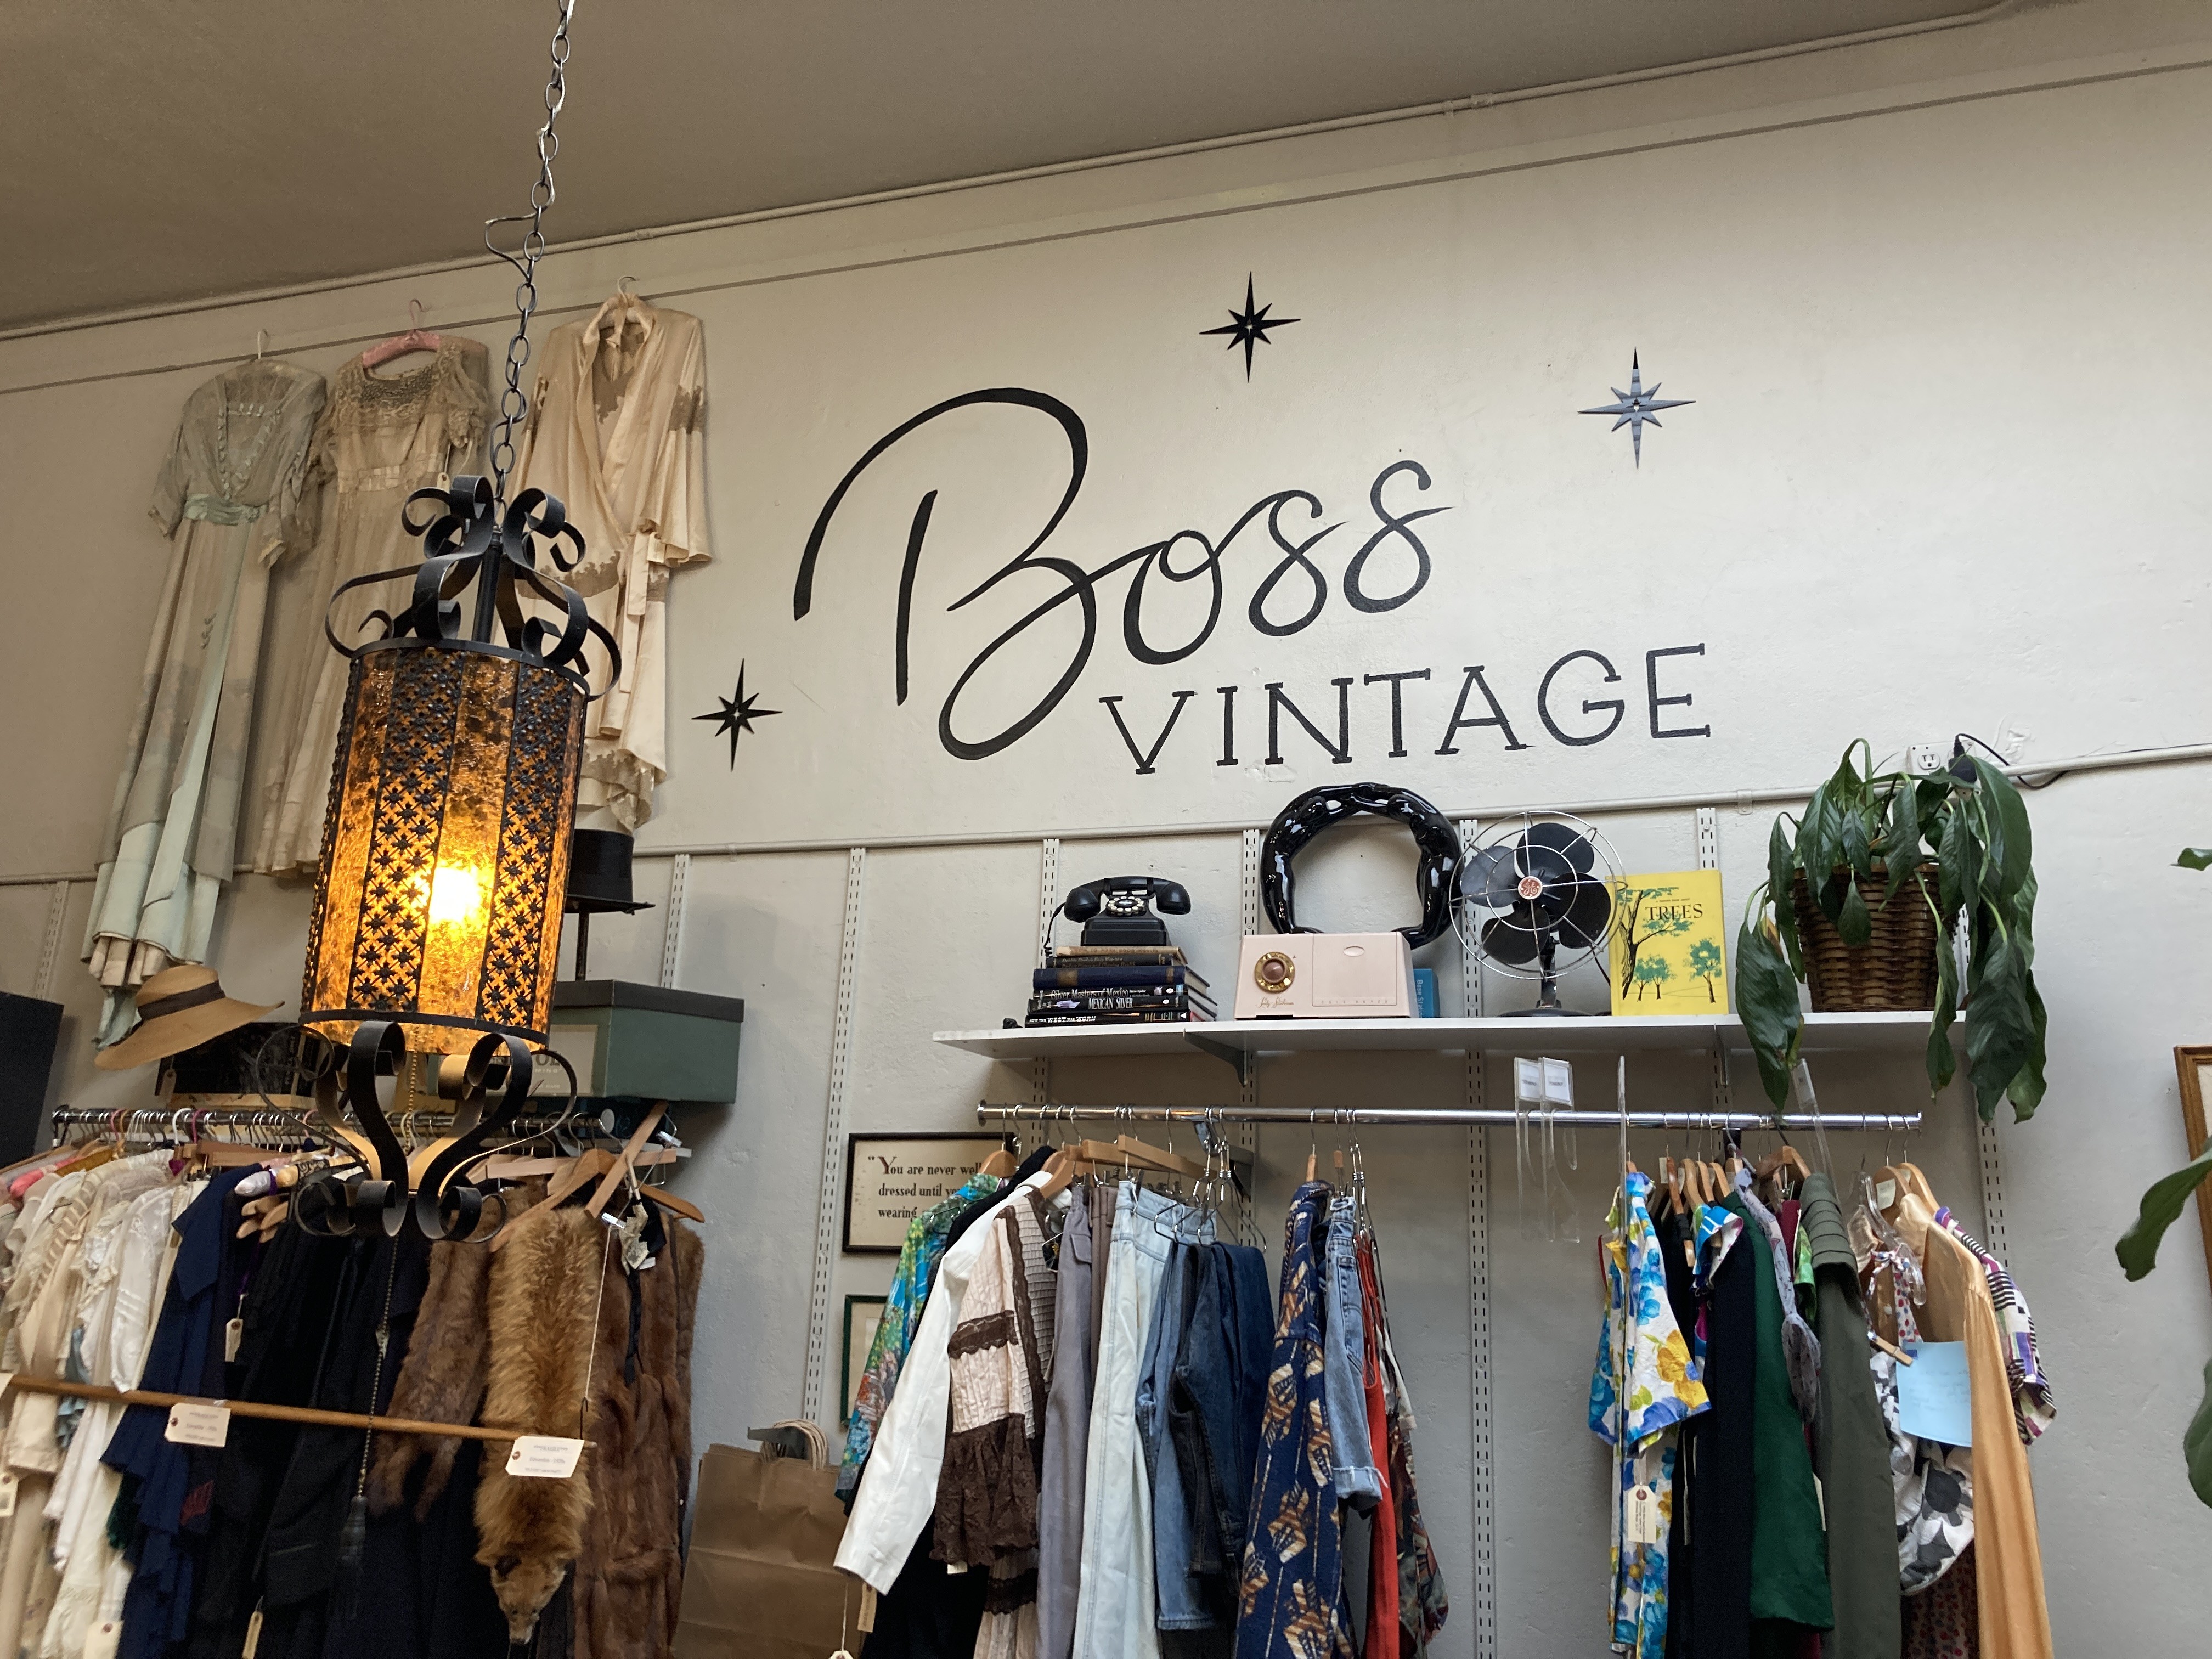 The 10 Best Vintage and Thrift Stores in Denver